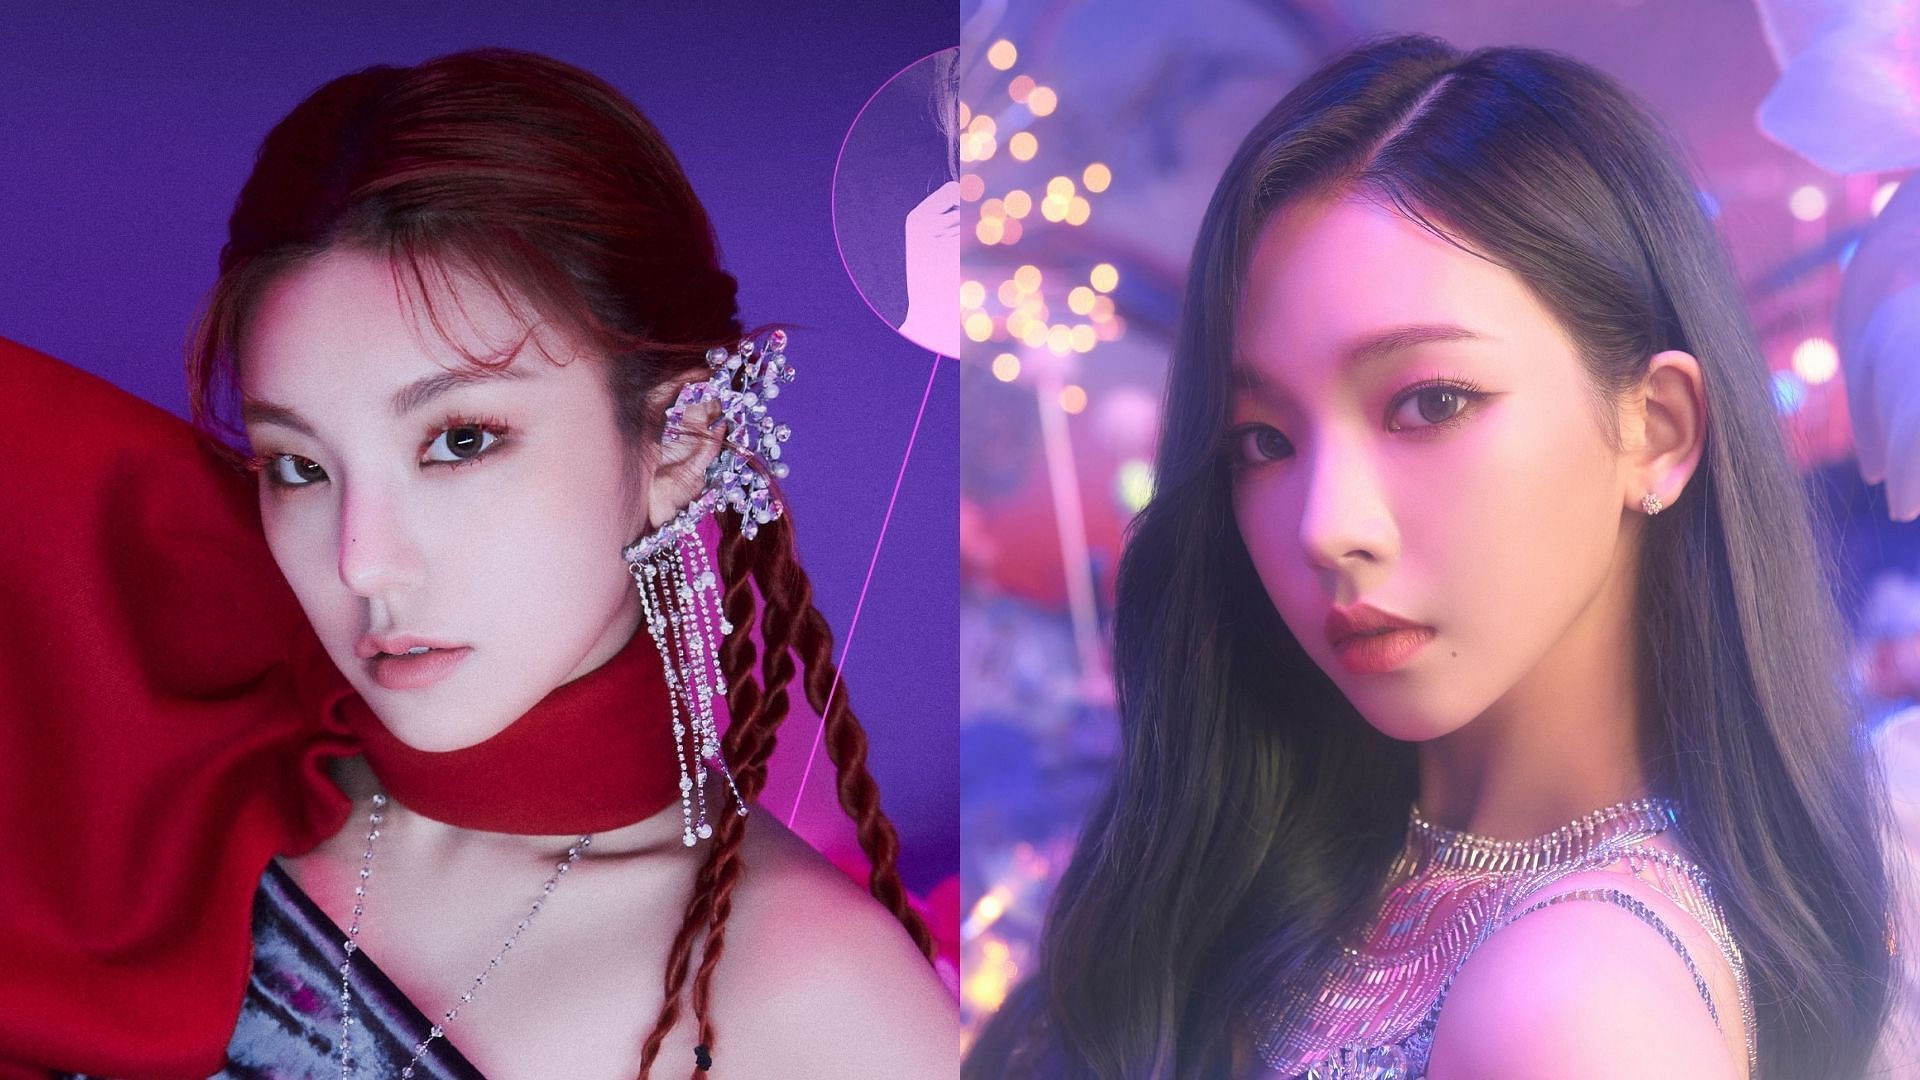 Yeji and Karina concept photos (Image via Twitter, @ITZYofficial and @aespa_official)